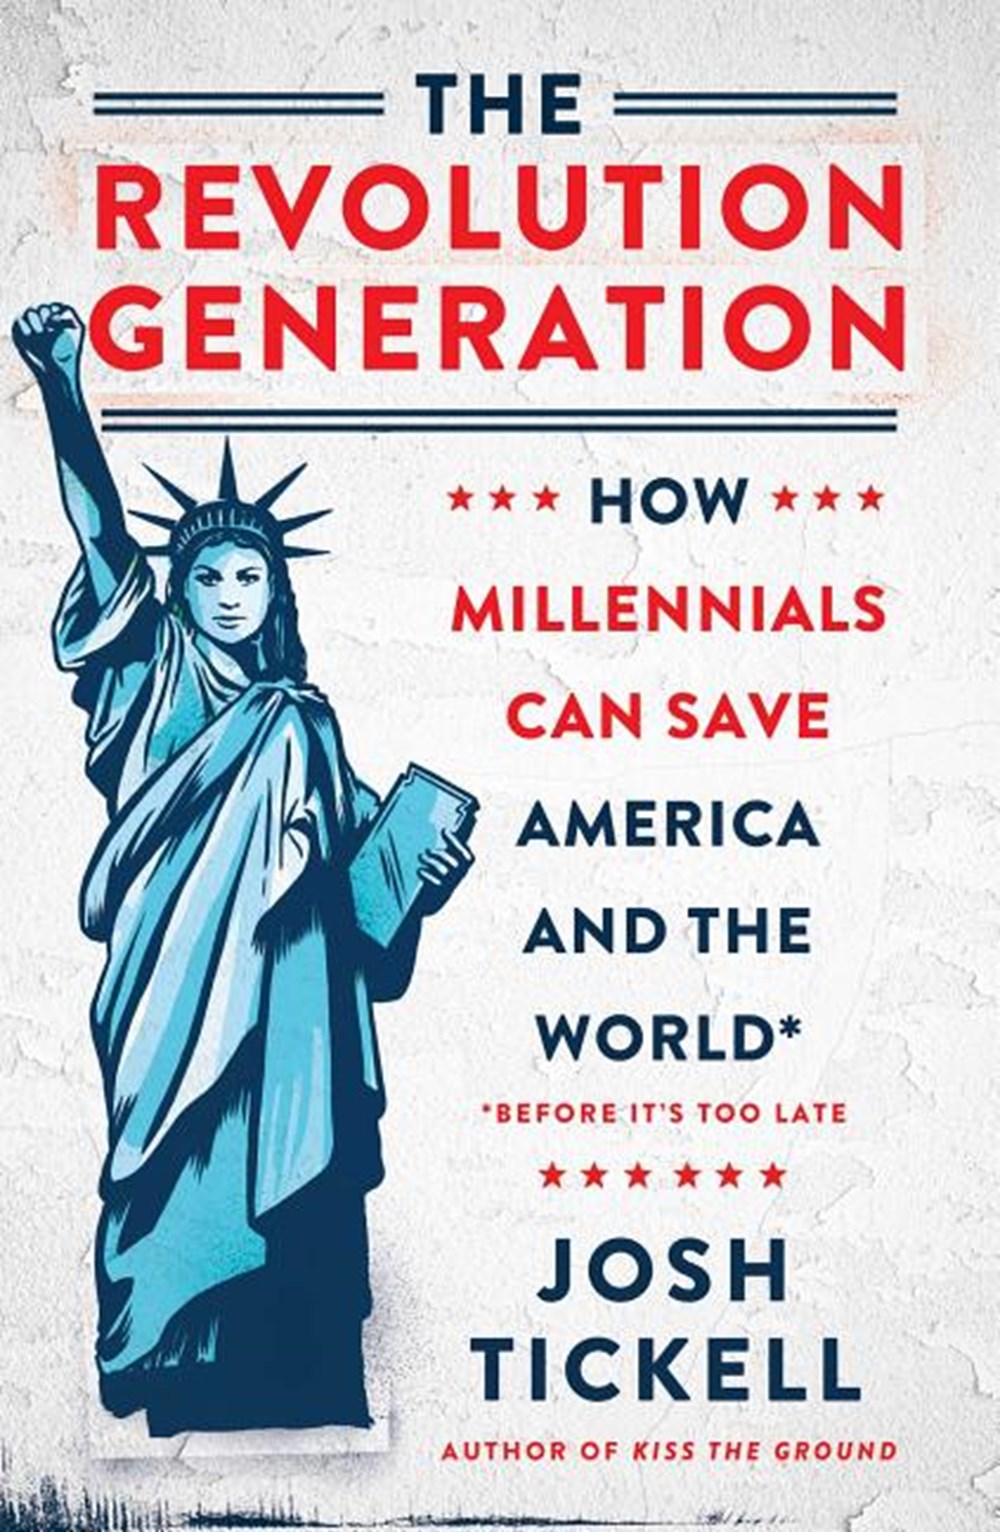 Revolution Generation: How Millennials Can Save America and the World (Before It's Too Late)